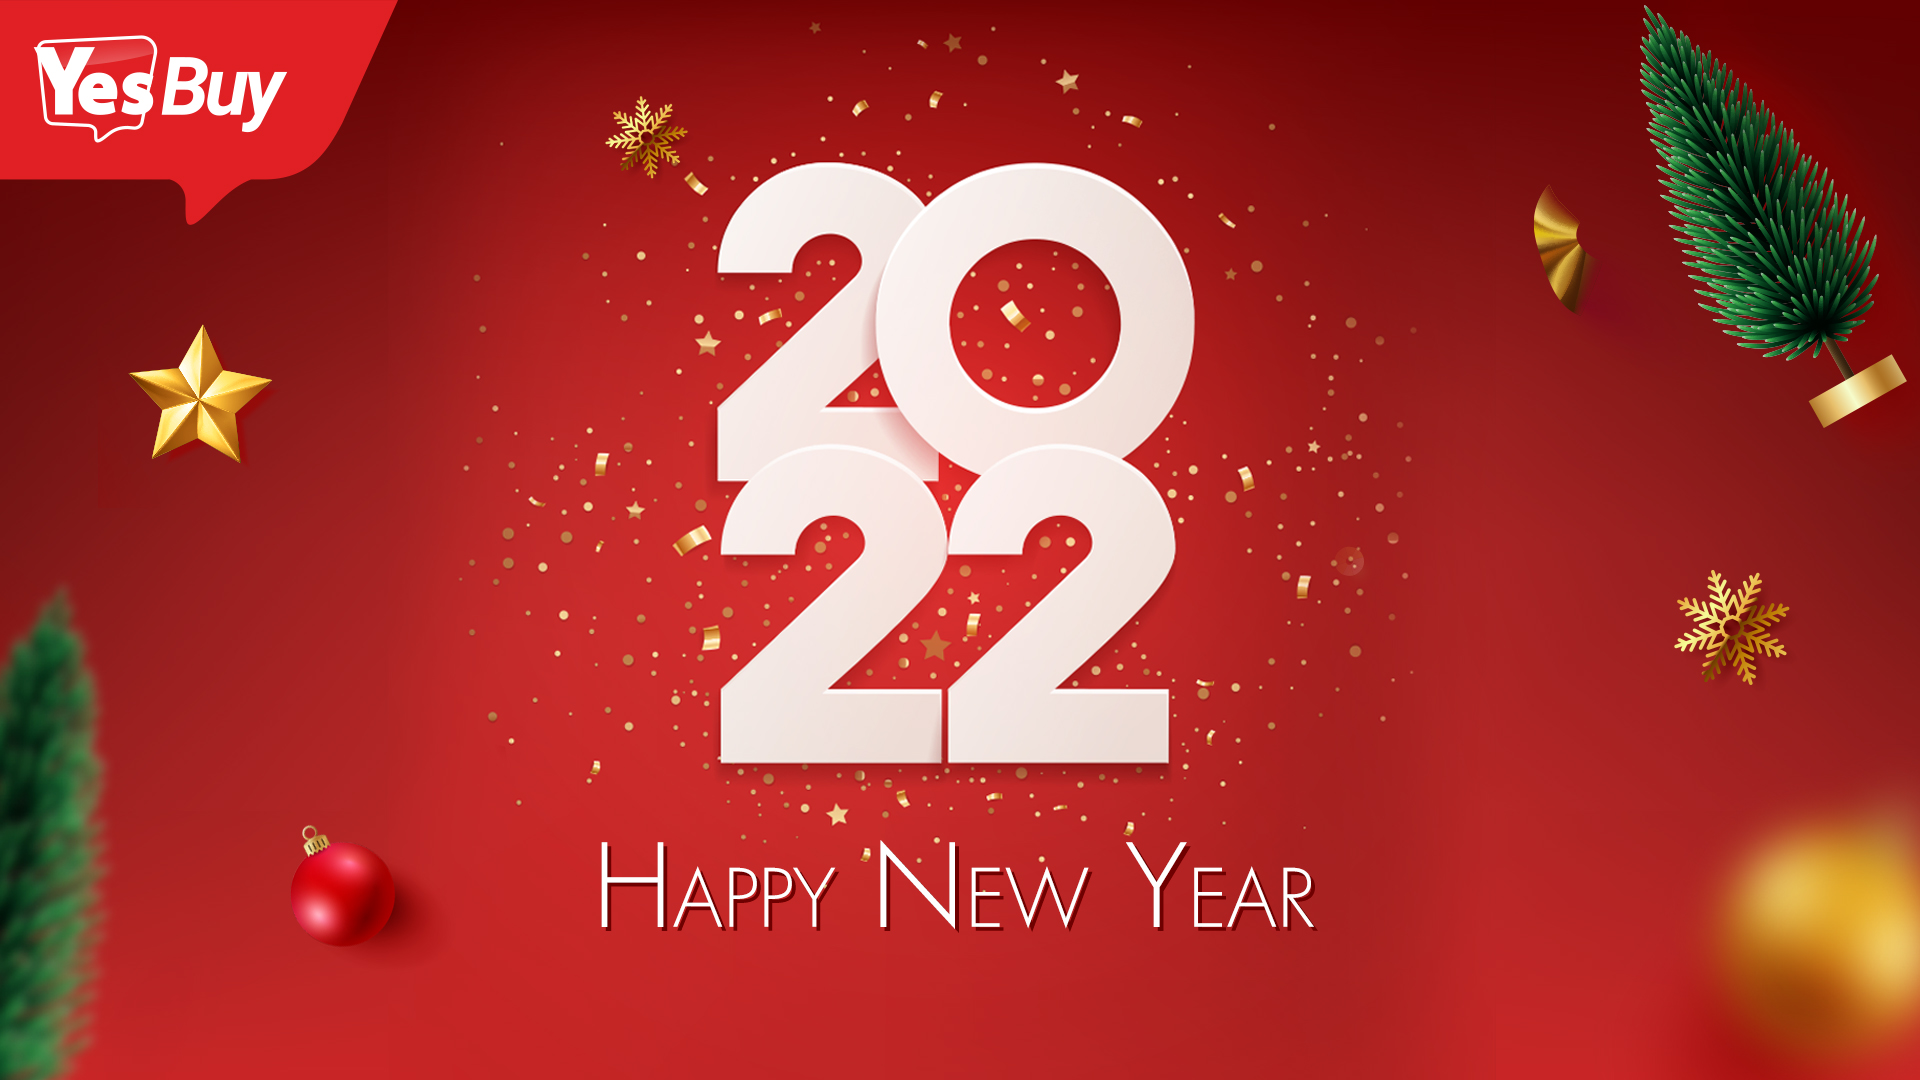 Happy New Year 2022 Yesbuy Banner